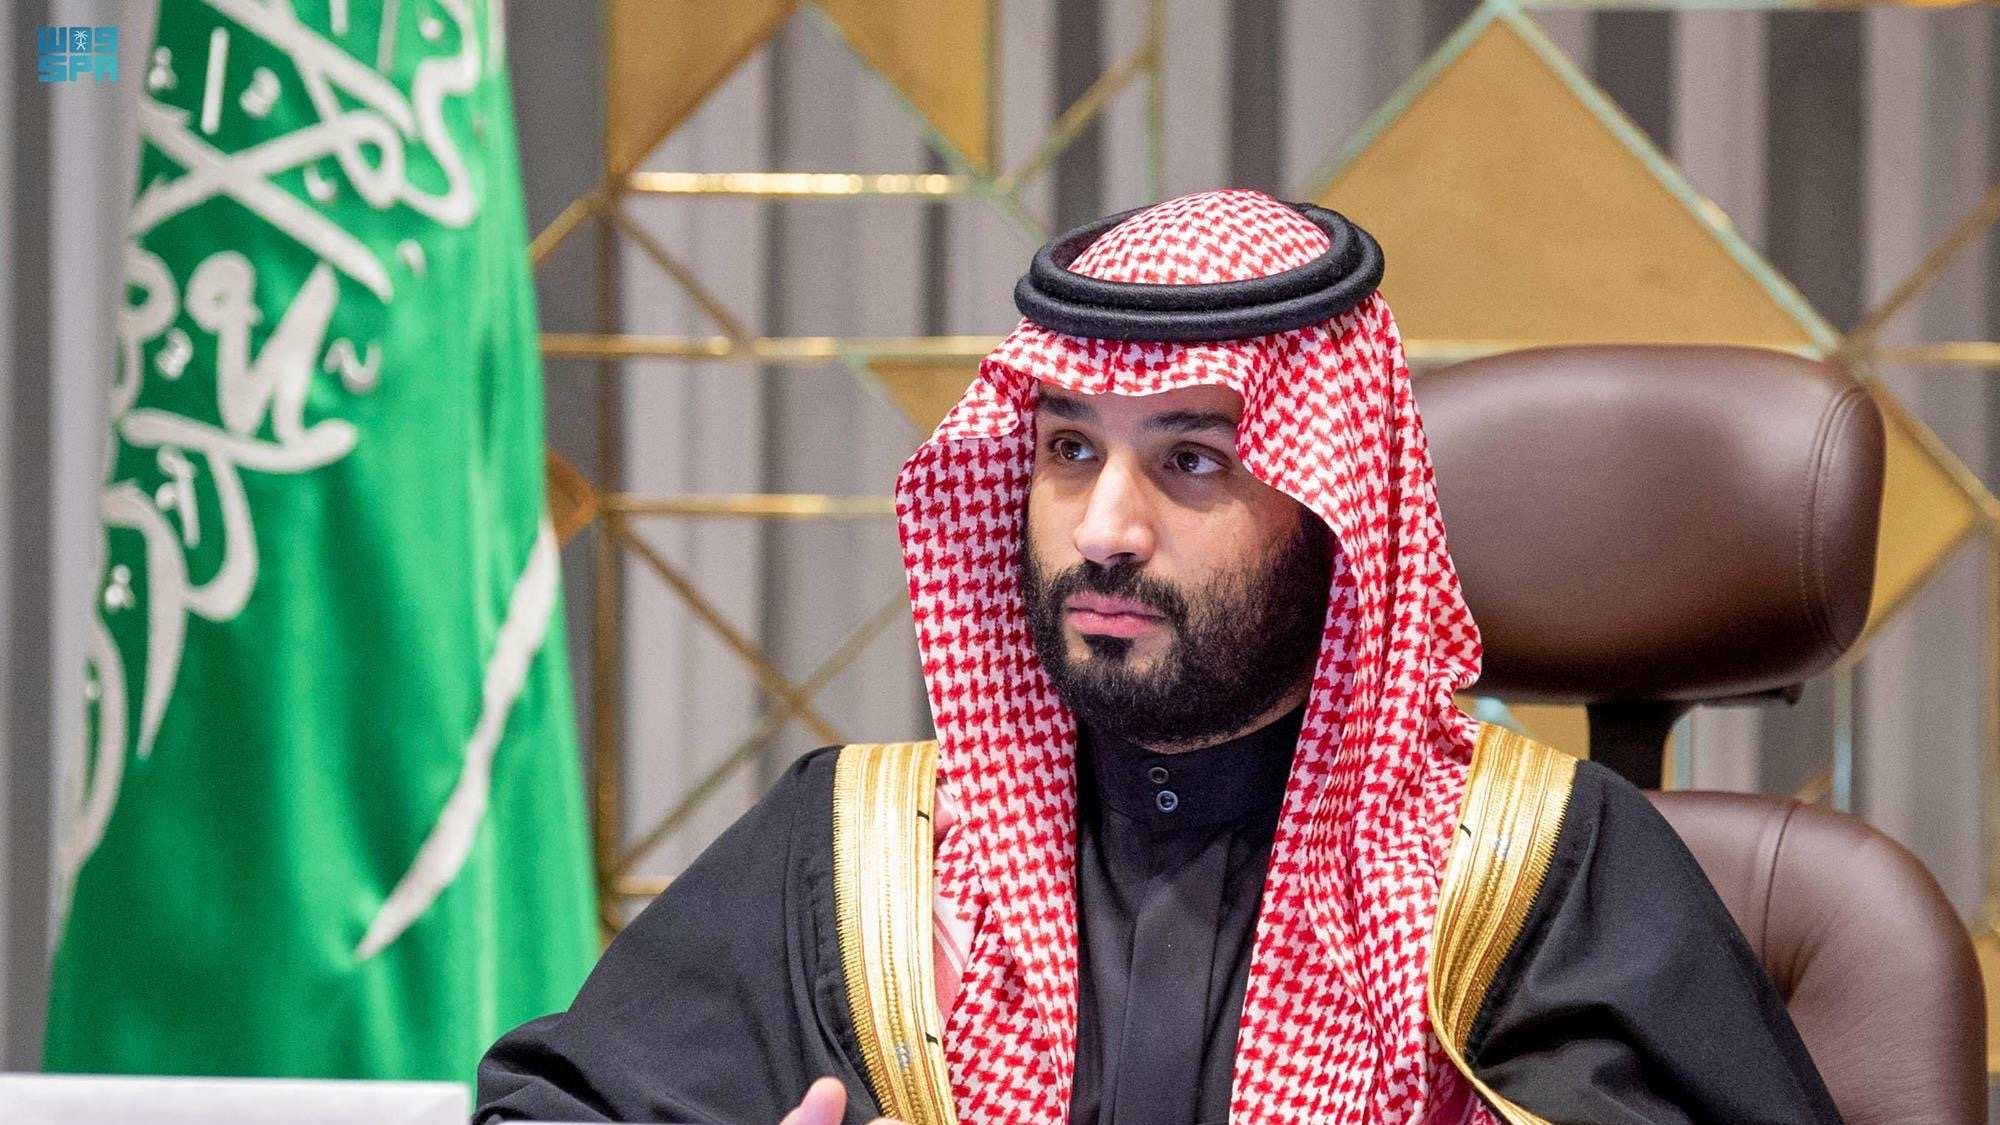 Saudi Crown Prince Mohammed bin Salman is upset with Biden over a number of issues, including the refusal to recognise him as the de facto ruler of the kingdom.